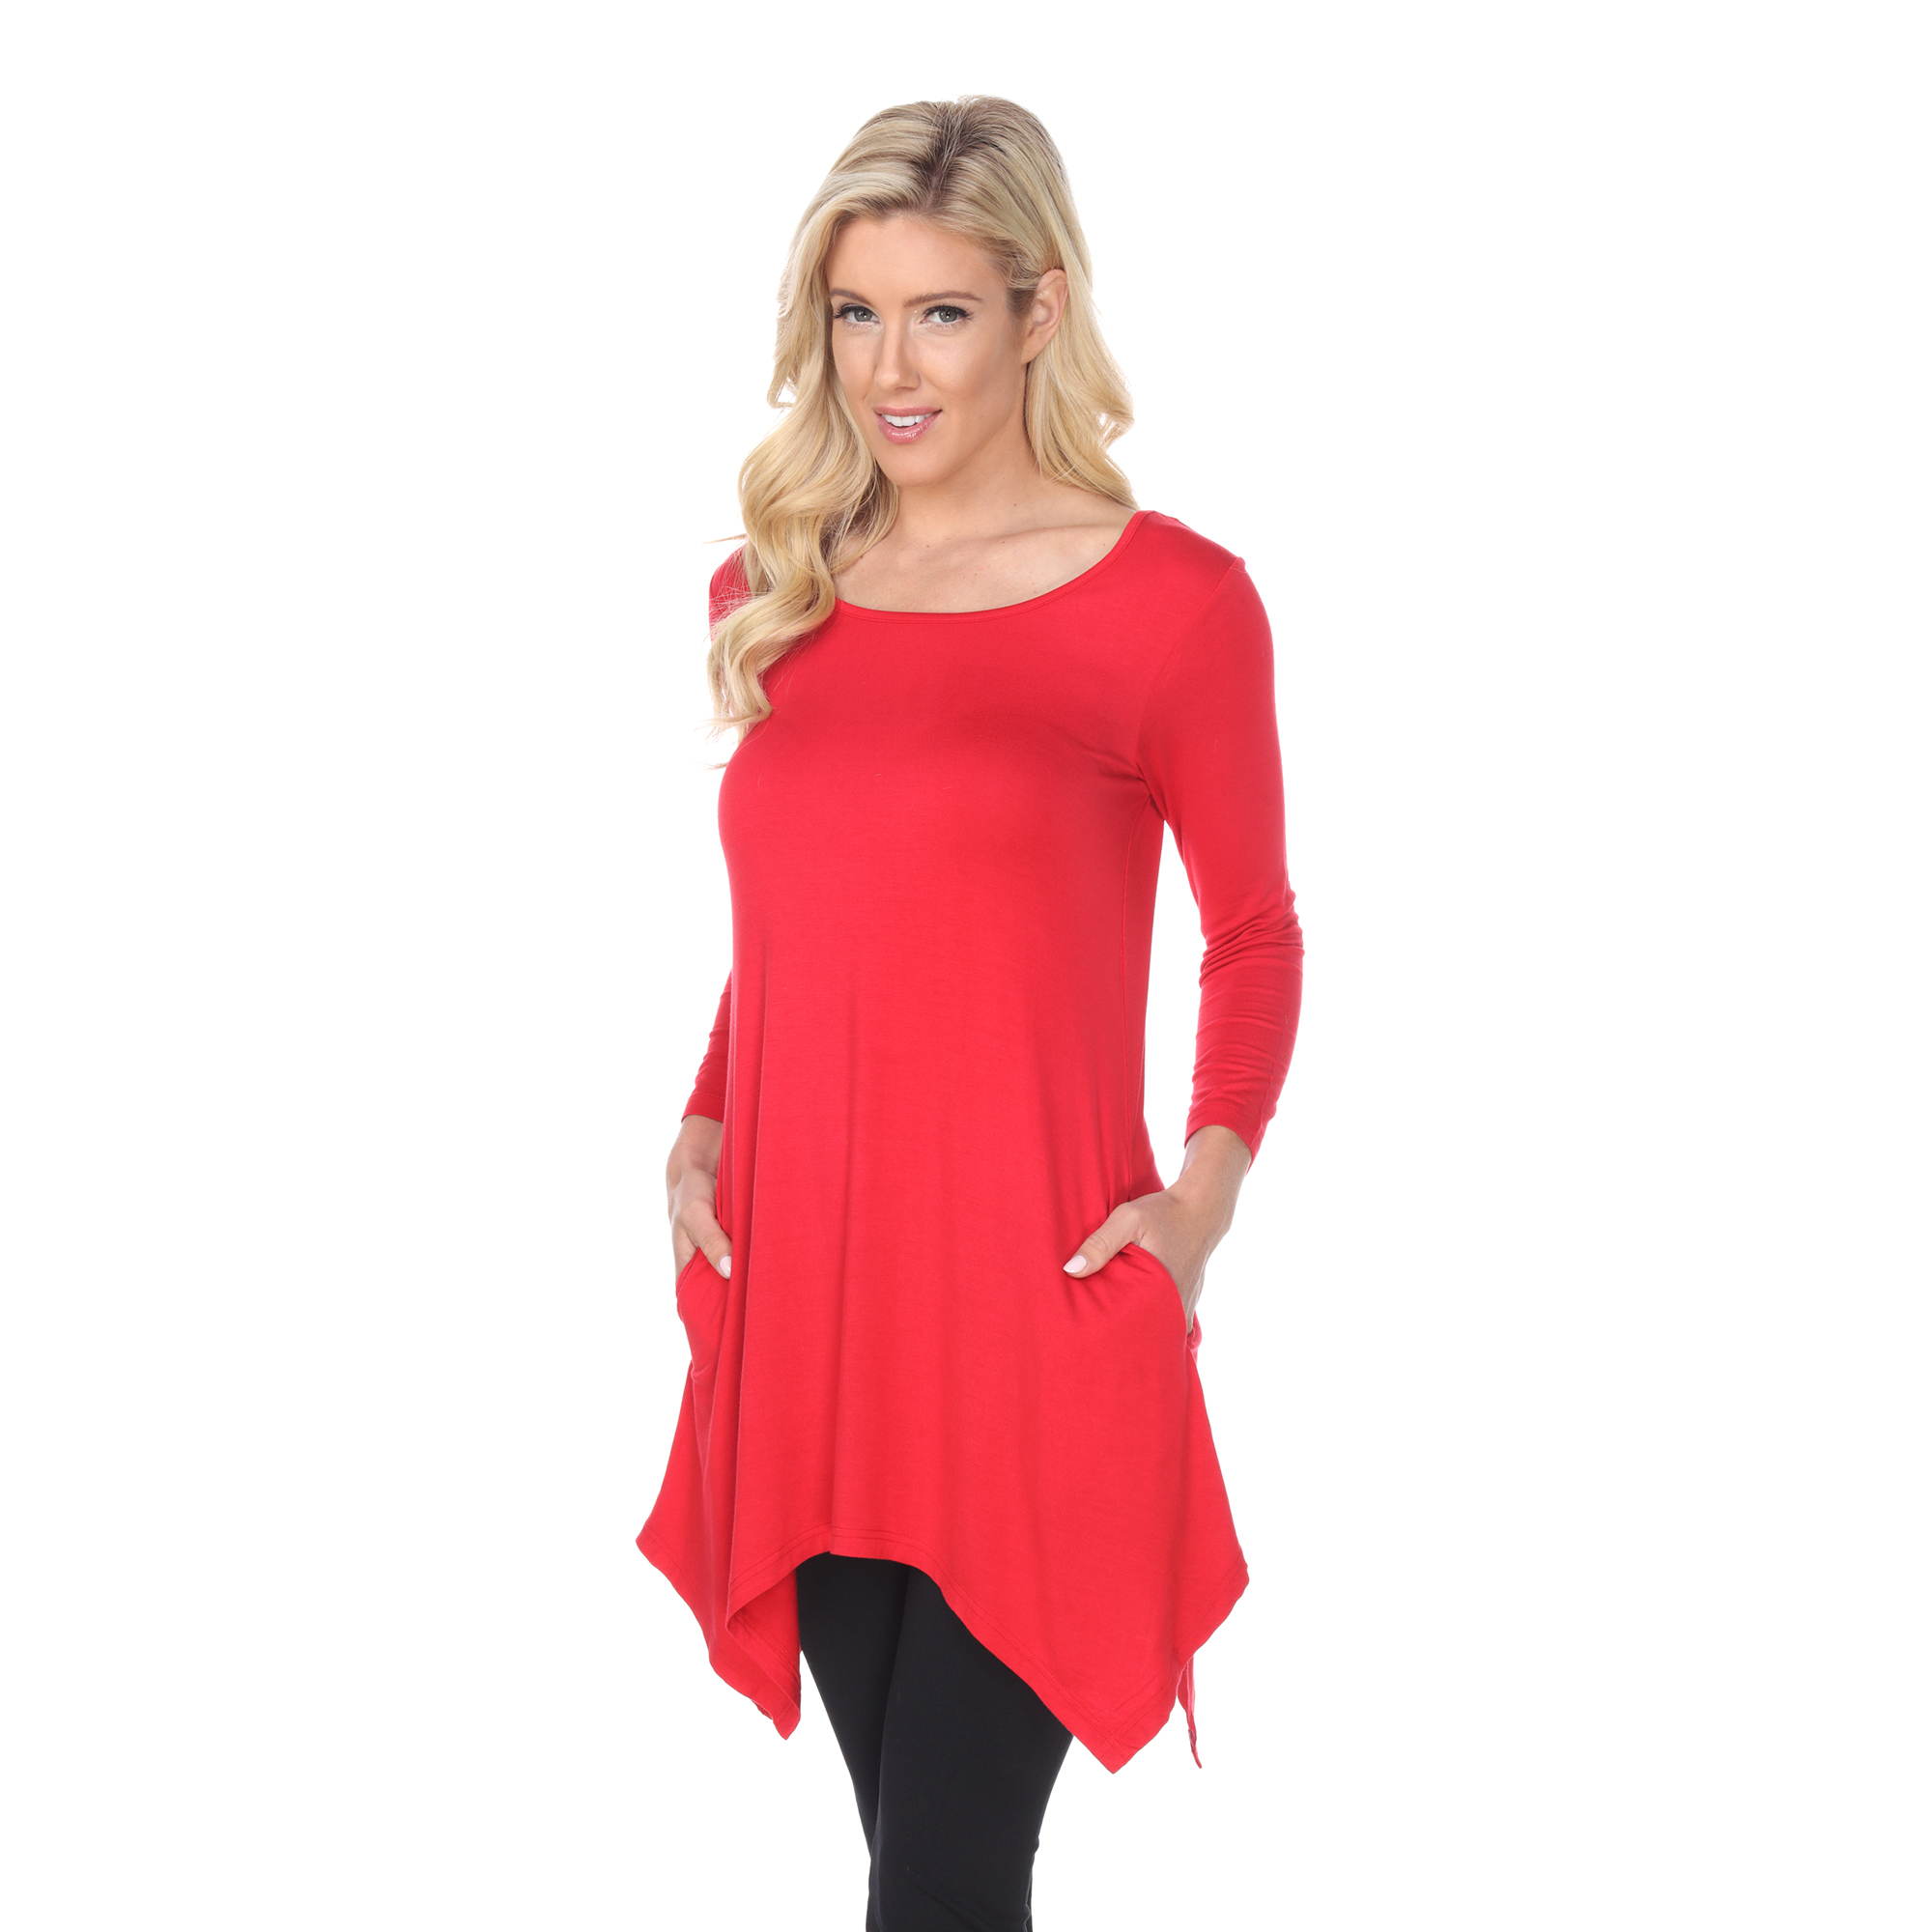 White Mark Women's Quarter Sleeve Tunic Top With Pockets - Red, 1X